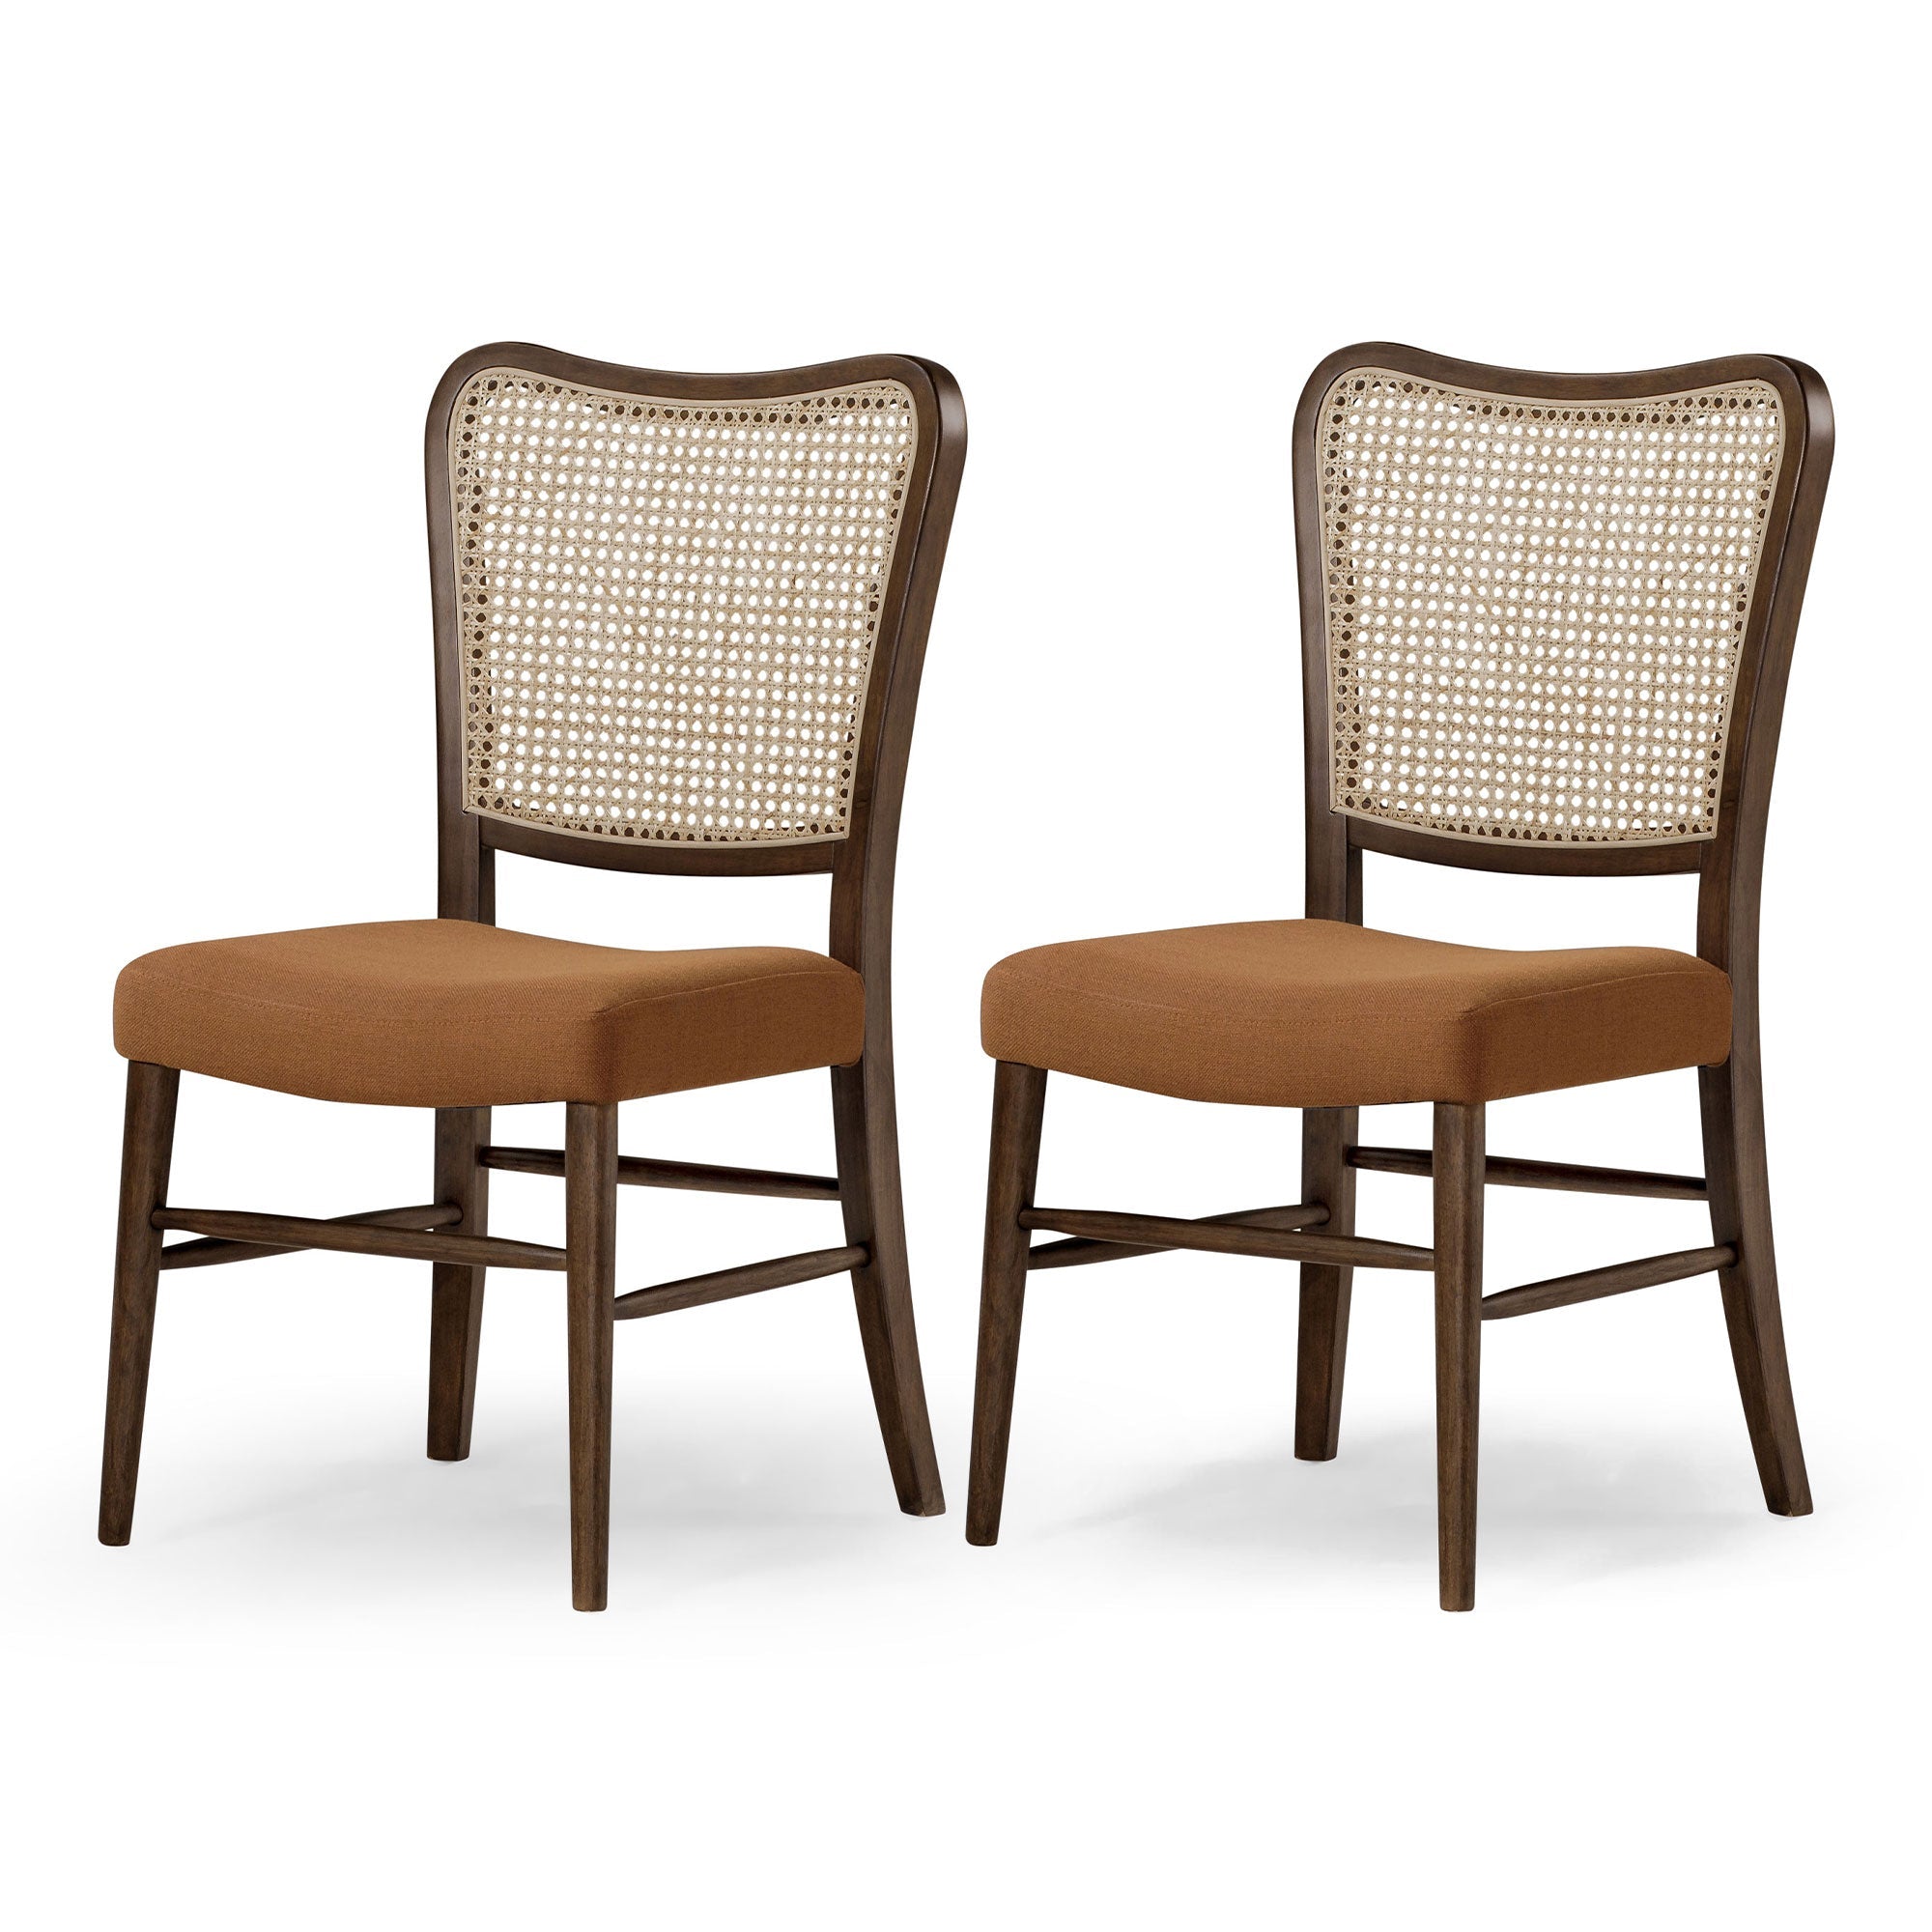 Maven-Lane-Vera-Wood-Dining-Chair,-Antique-Brown-&-Clay-Canvas-Fabric,-Set-of-2-Kitchen-&-Dining-Room-Chairs